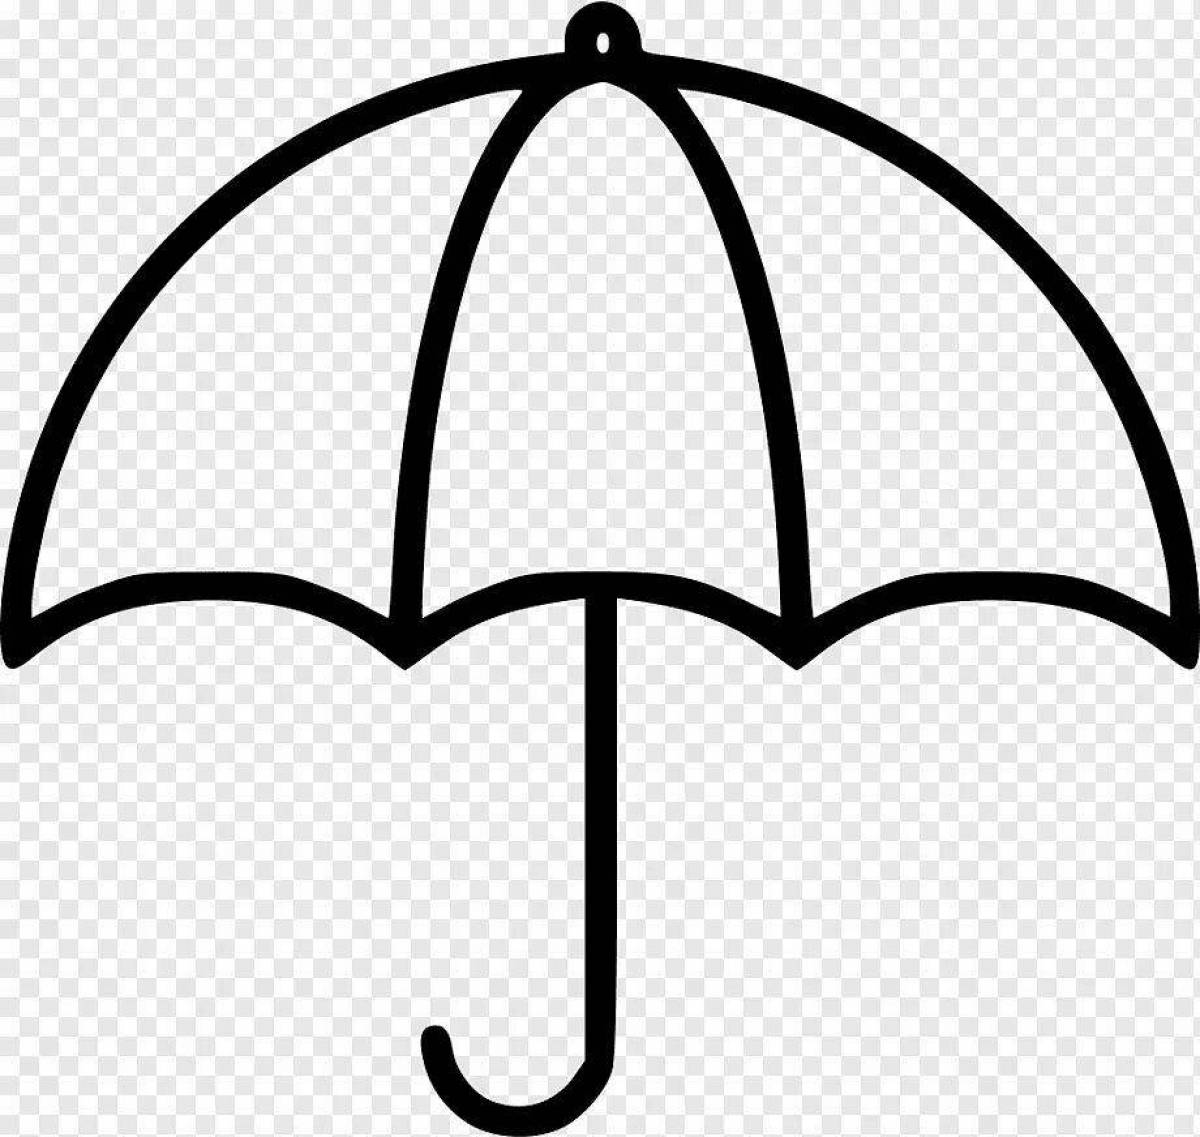 Colorful and colorful umbrella coloring book for kids